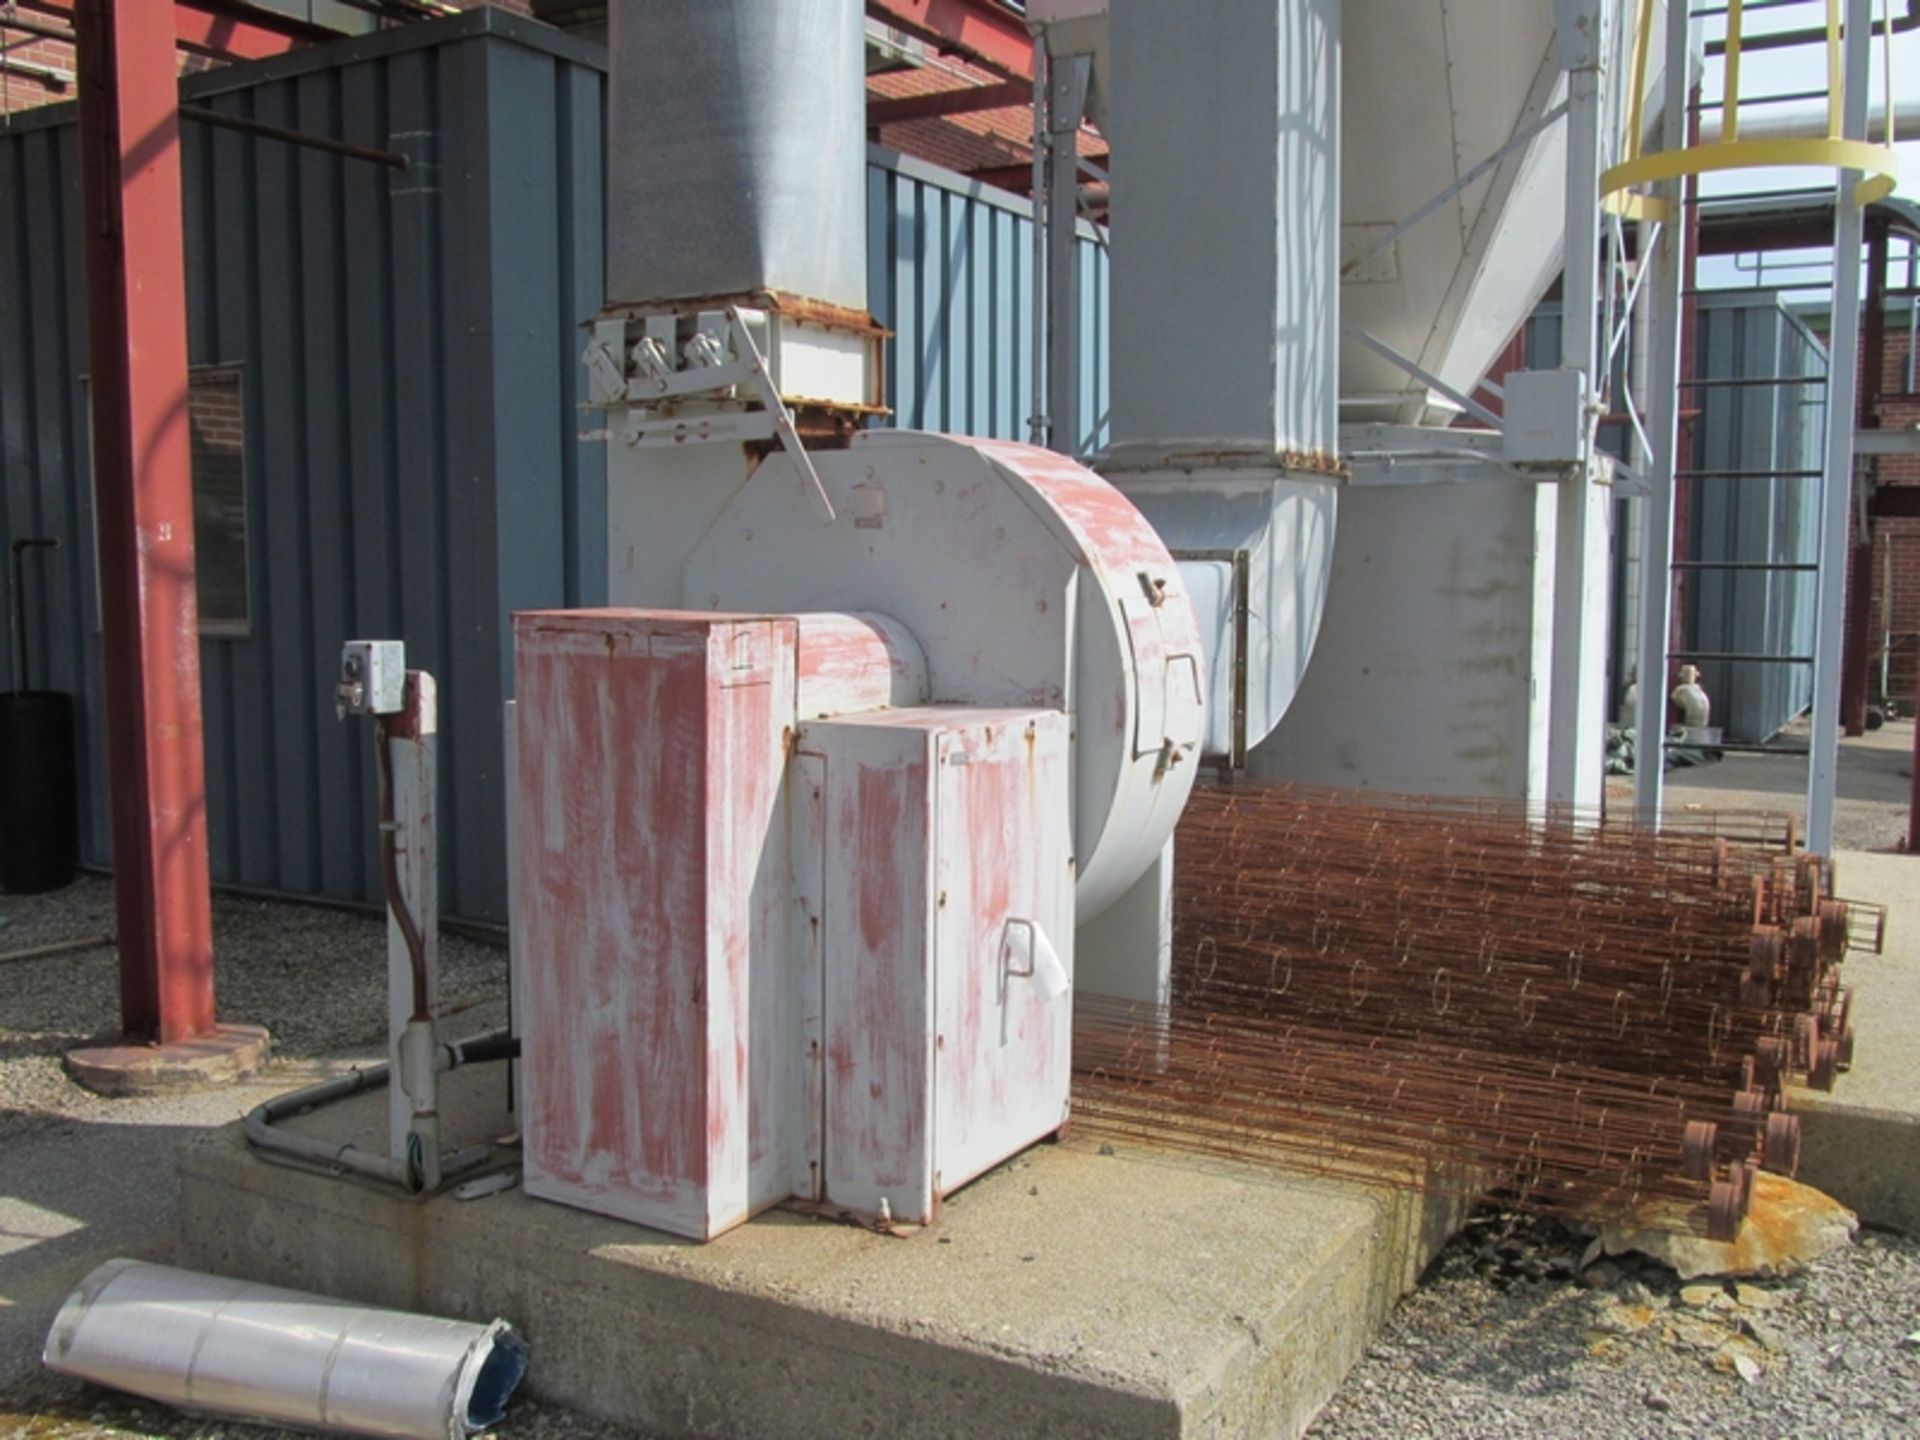 Farr Ramtube Jet Pulse Dust Collector; Carbon Steel. Approximately 900 square feet filter area. - Image 2 of 2